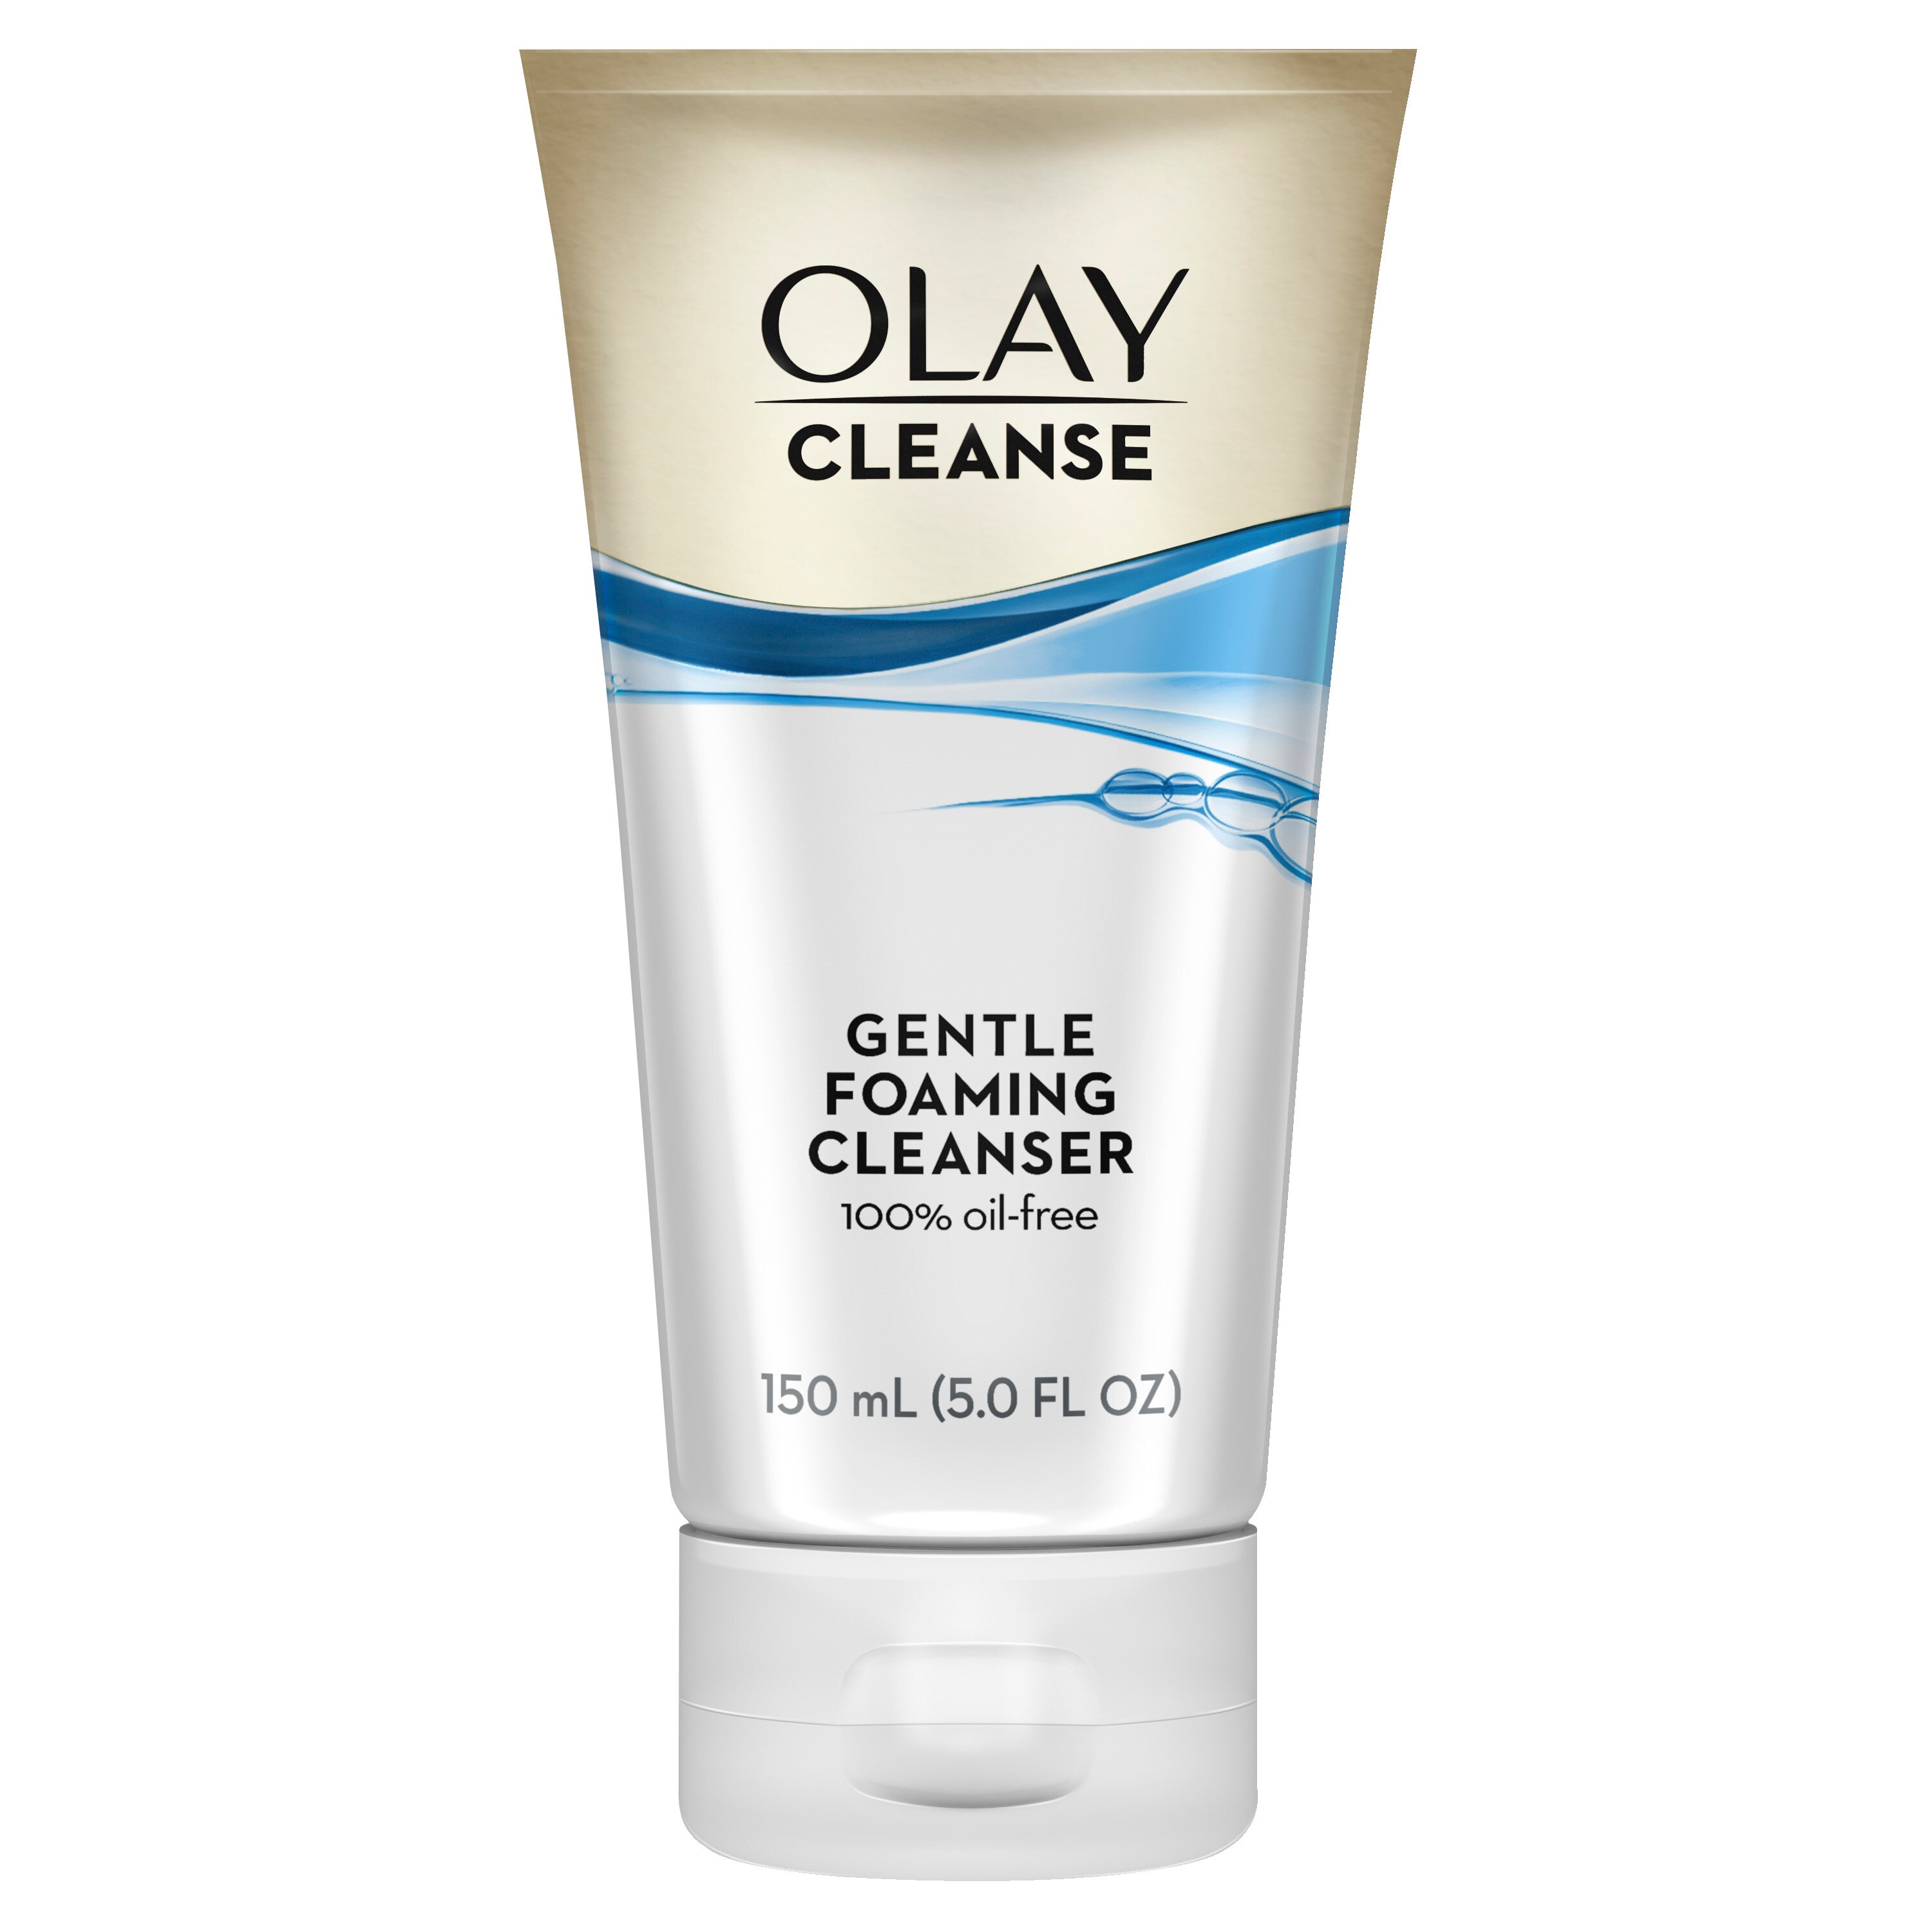 Olay Cleanse Gentle Foaming Face Cleanser for Sensitive Skin